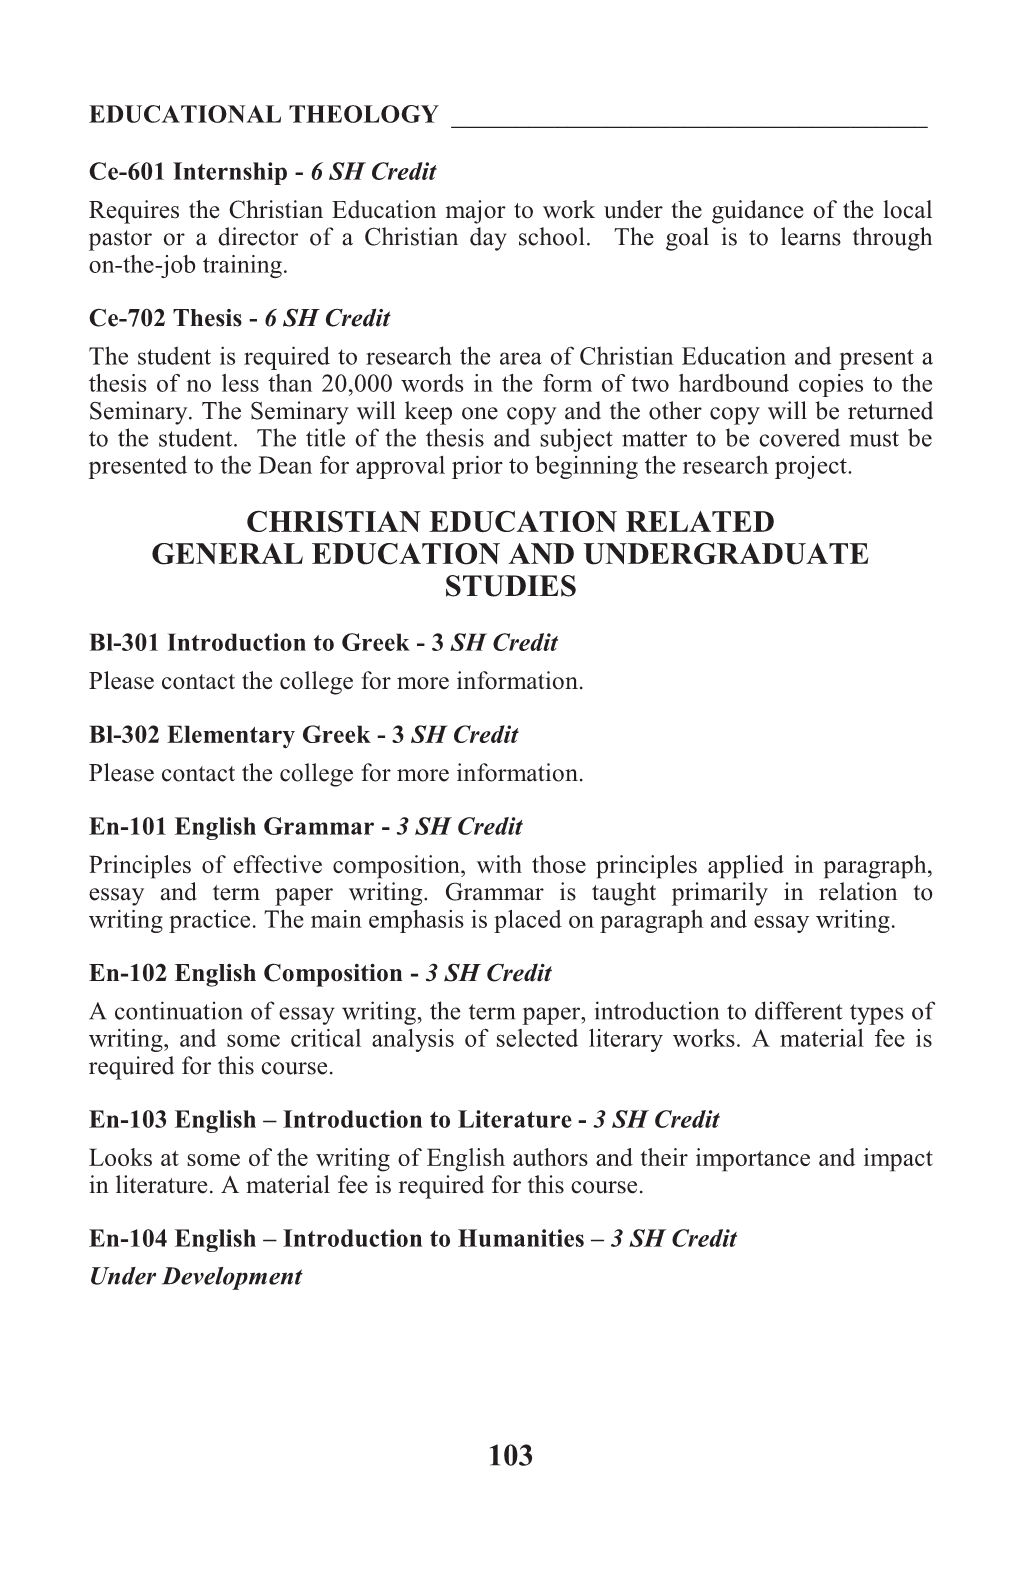 103 Christian Education Related General Education